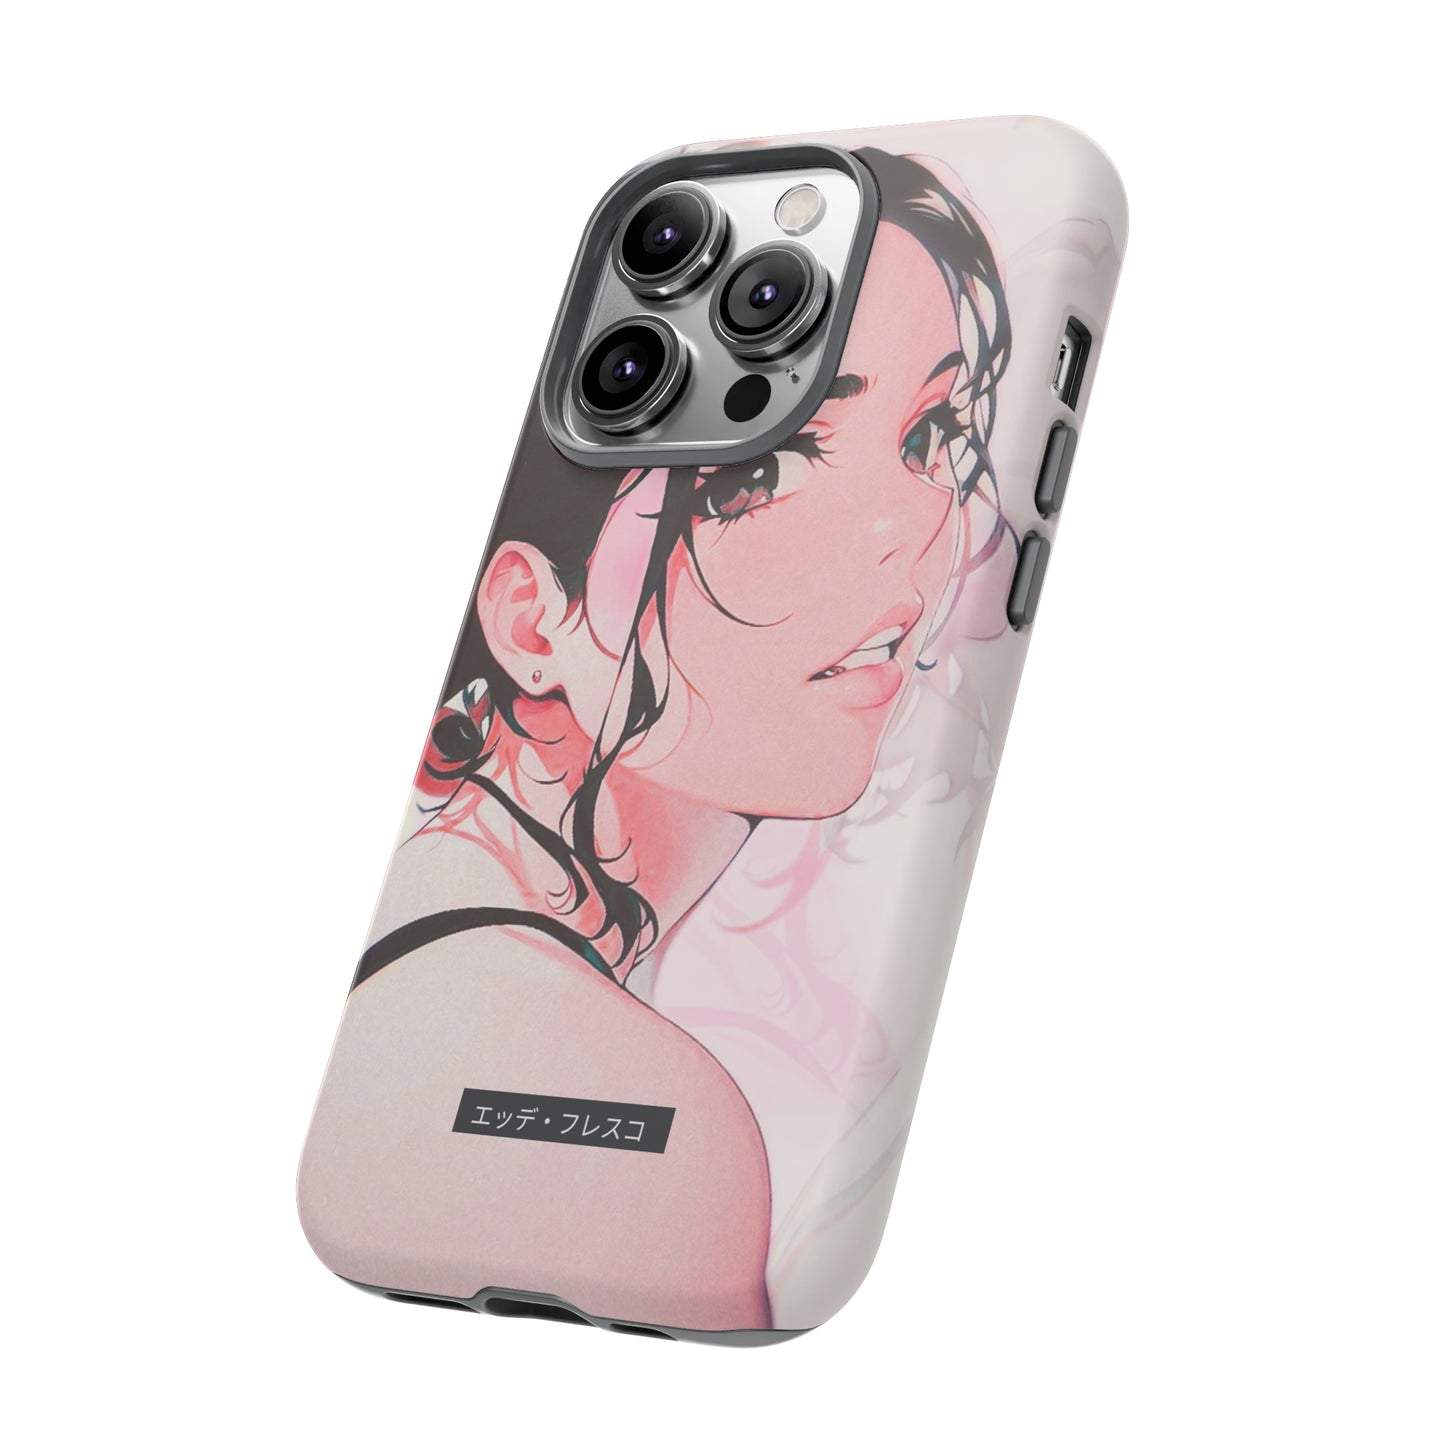 Anime Style Art Tough Cases- "Everything"